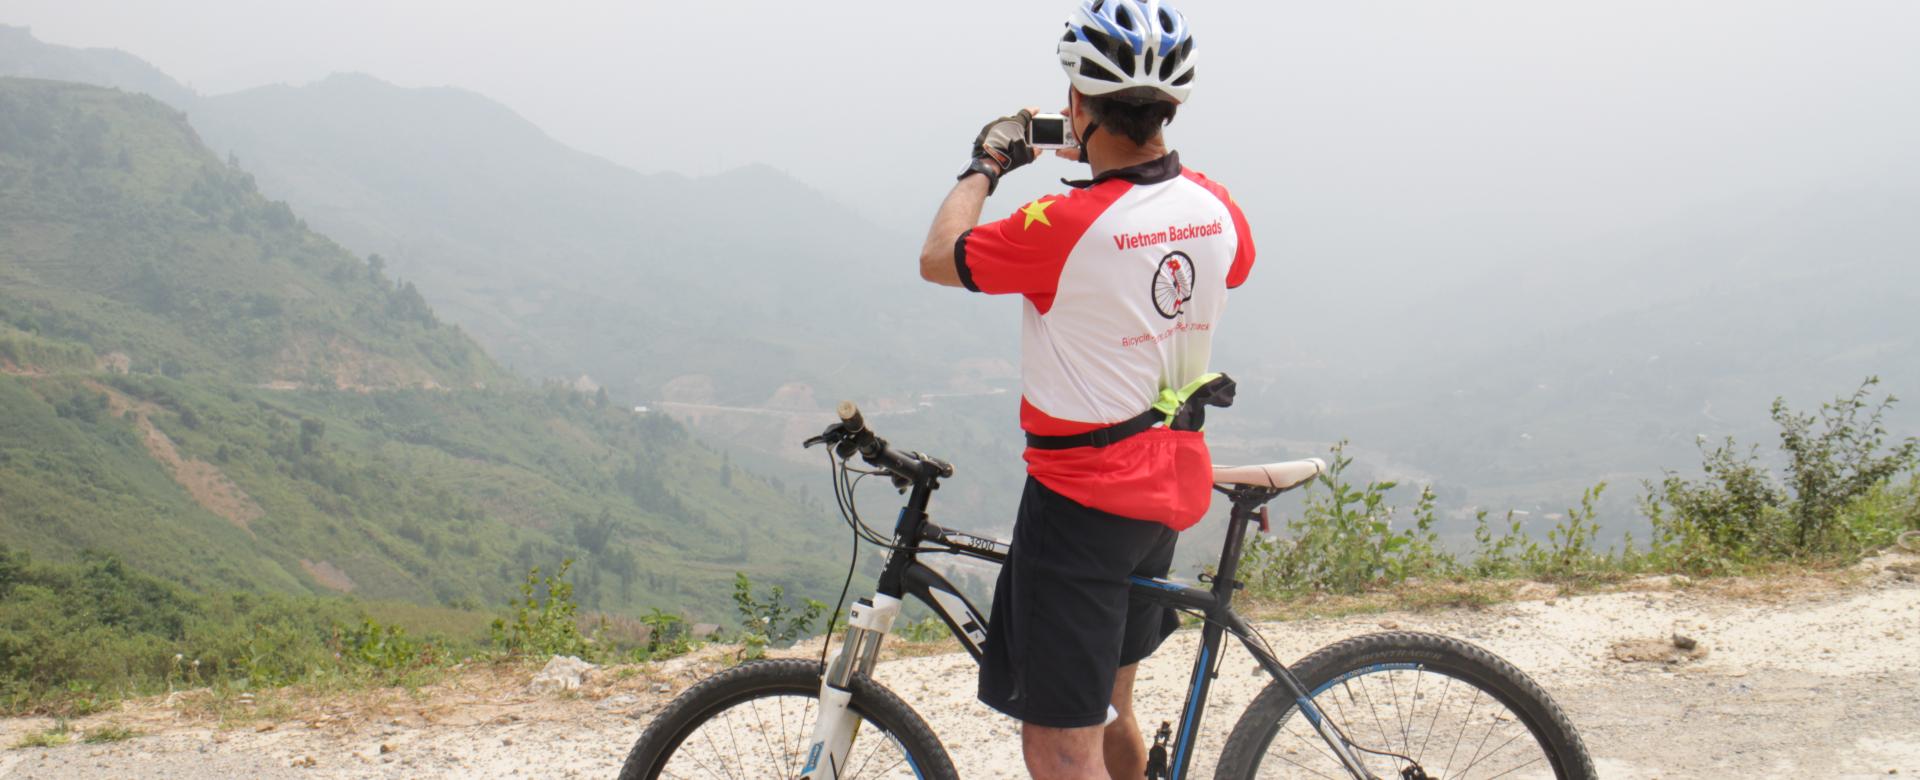 Take a night train to Lao Cai, Cycling to Sapa, explore Muong Hoa Valleys and hill tribal villages